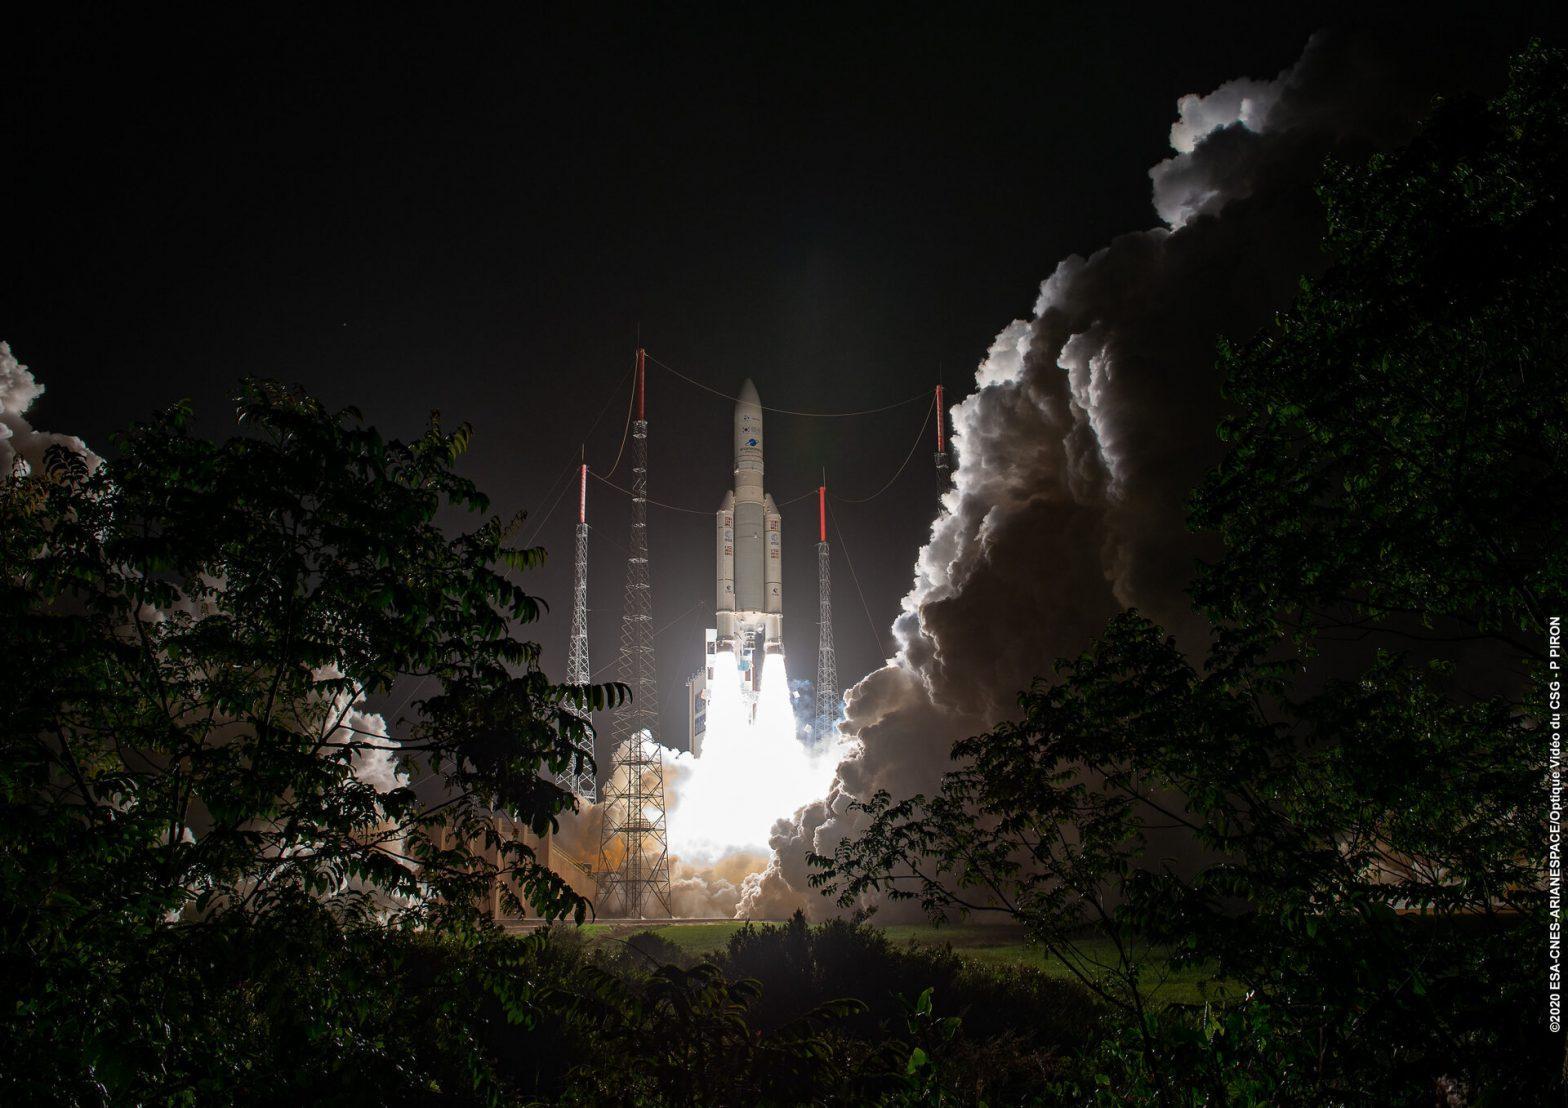 Arianespace will launch an Indian Communication Satellite